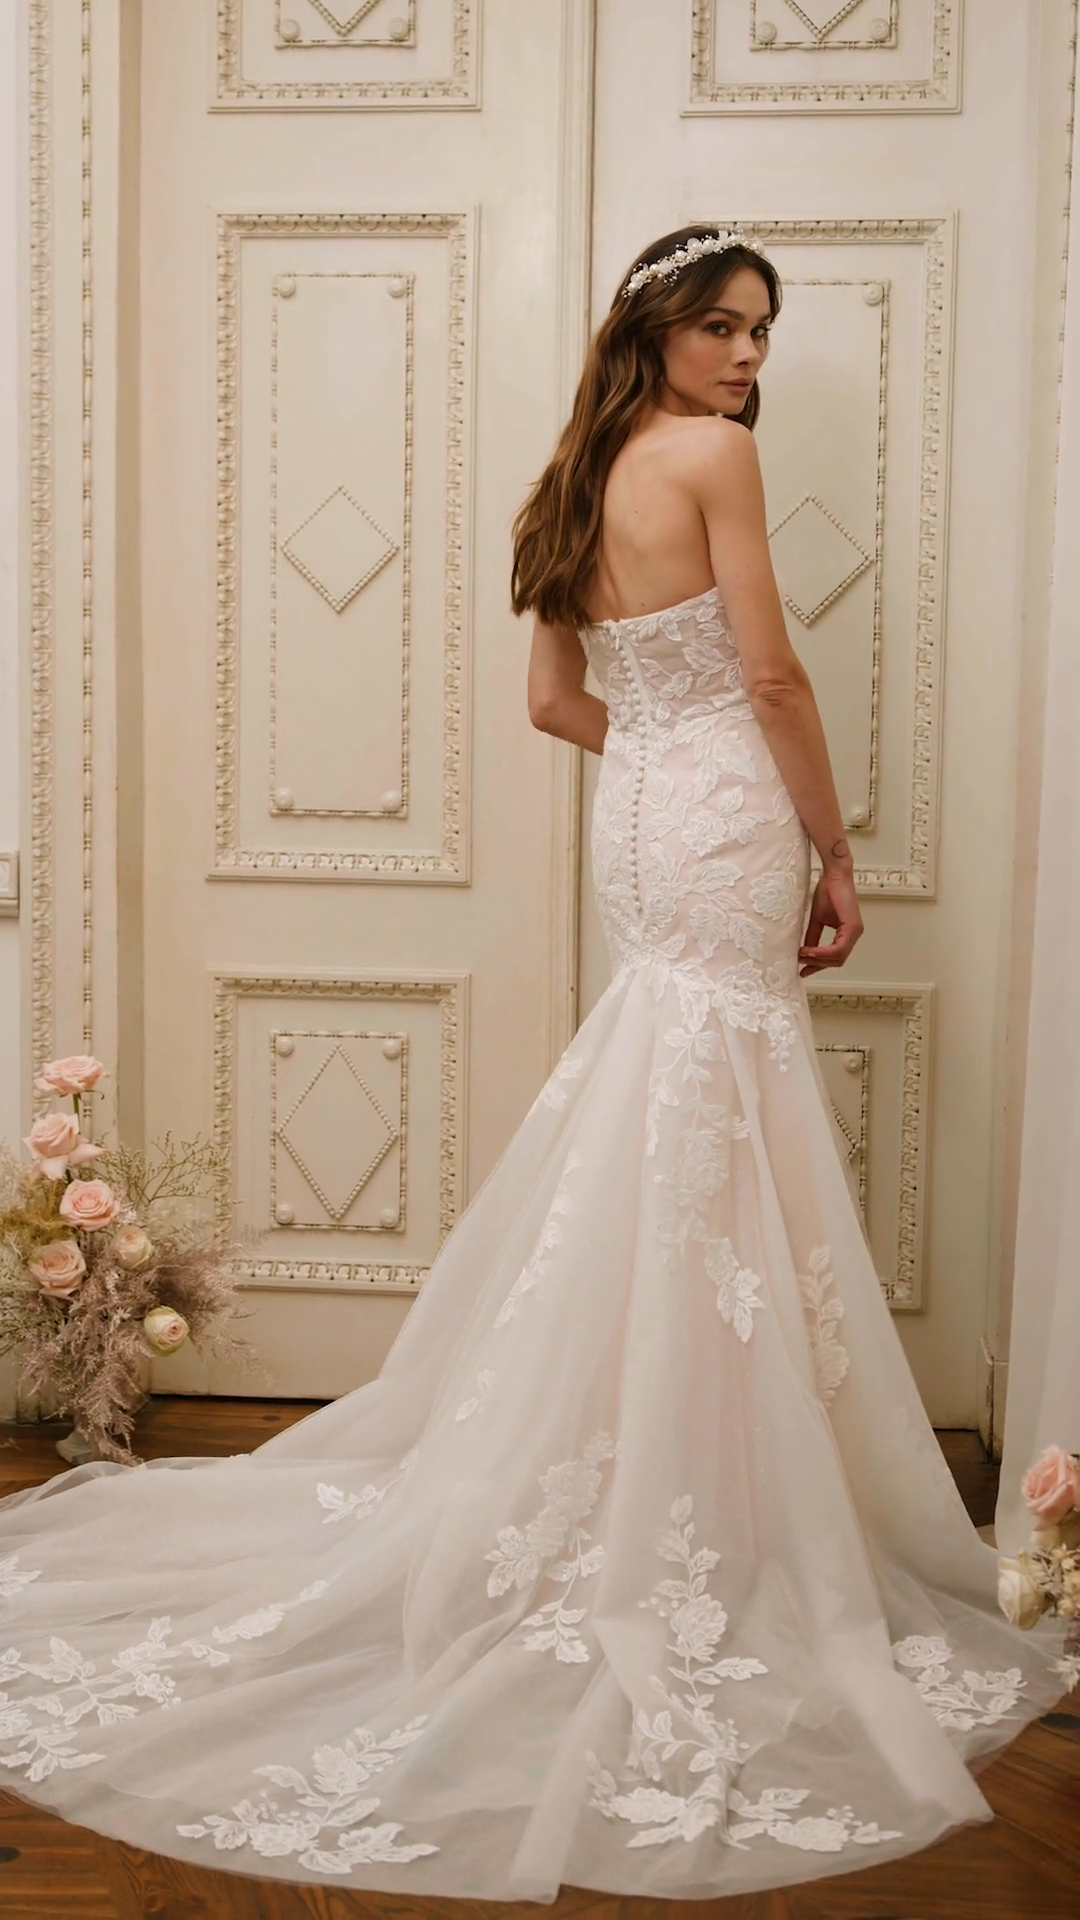 Moonlight Collection J6857 blush bridal gowns, ivory bridal gowns, white wedding dresses & more